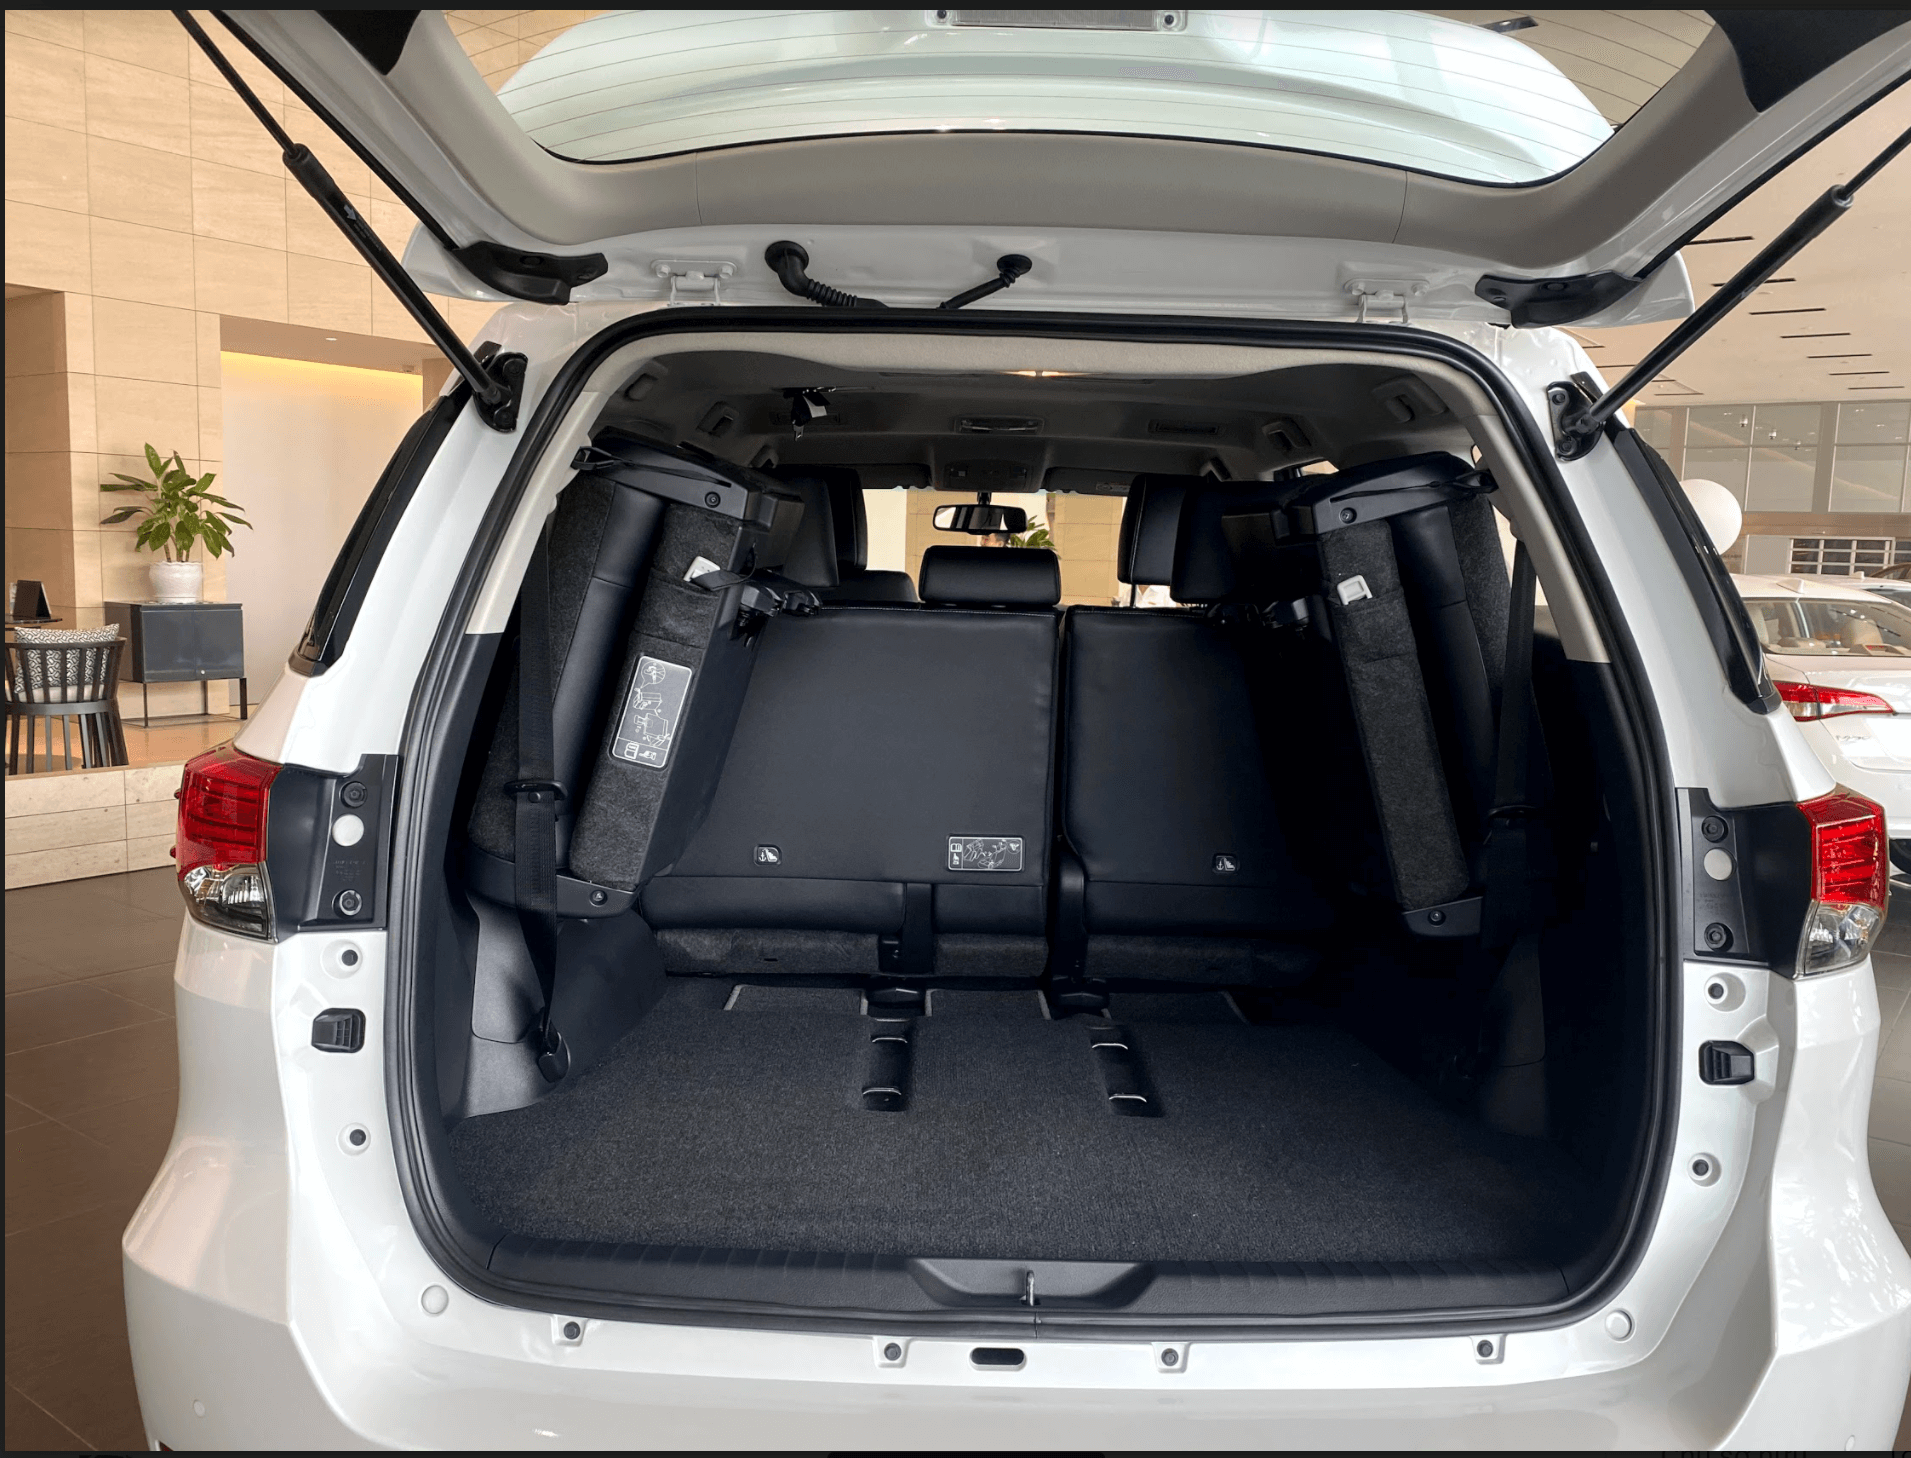 Toyota fortuner v 2020 has a spacious luggage compartment, suitable for picnics,